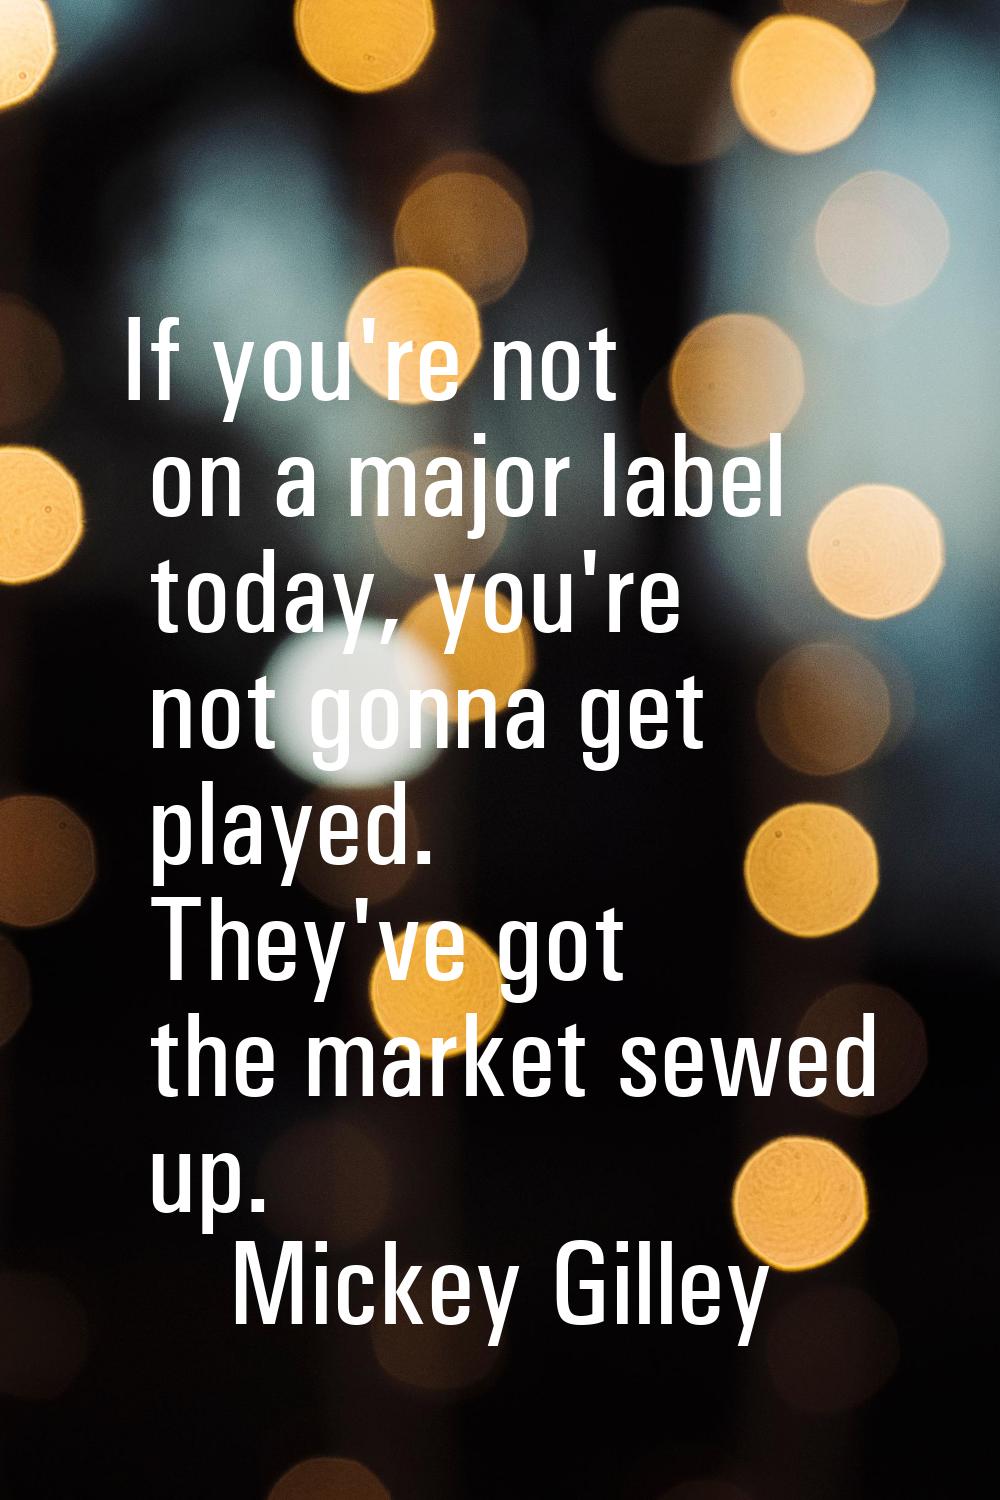 If you're not on a major label today, you're not gonna get played. They've got the market sewed up.